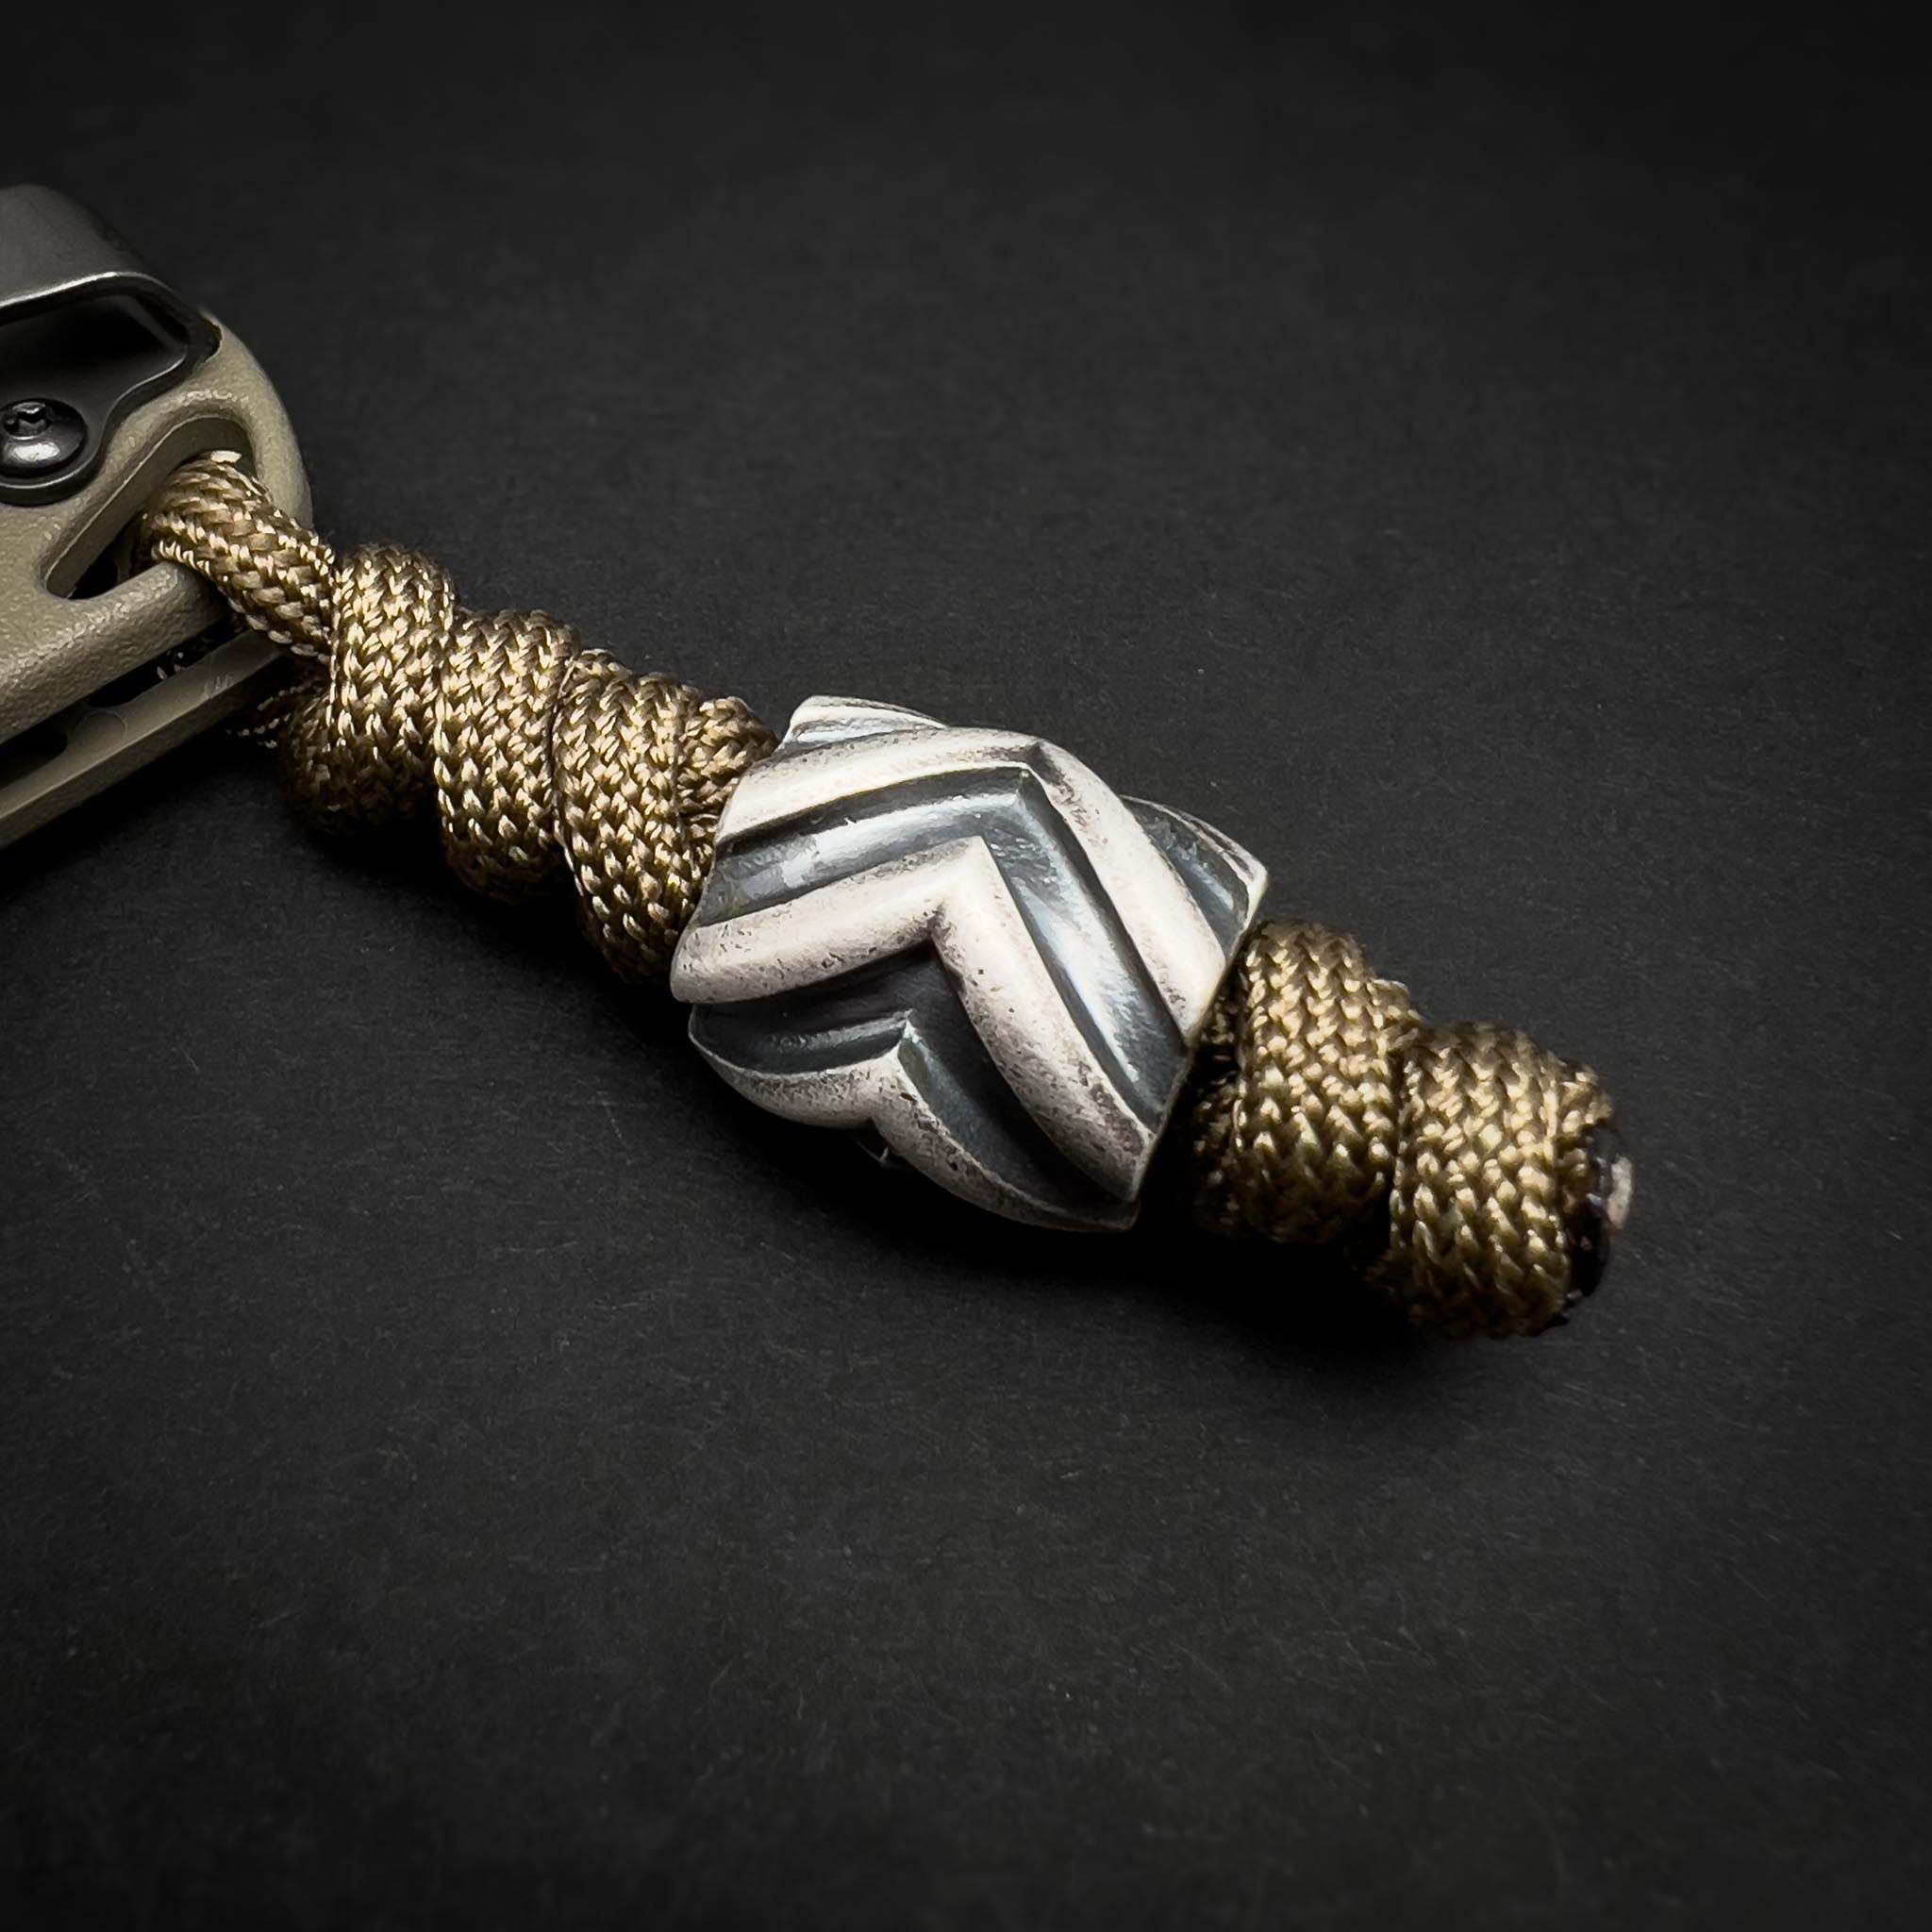 Chevron Lanyard Bead - Antique Finished Sterling Silver